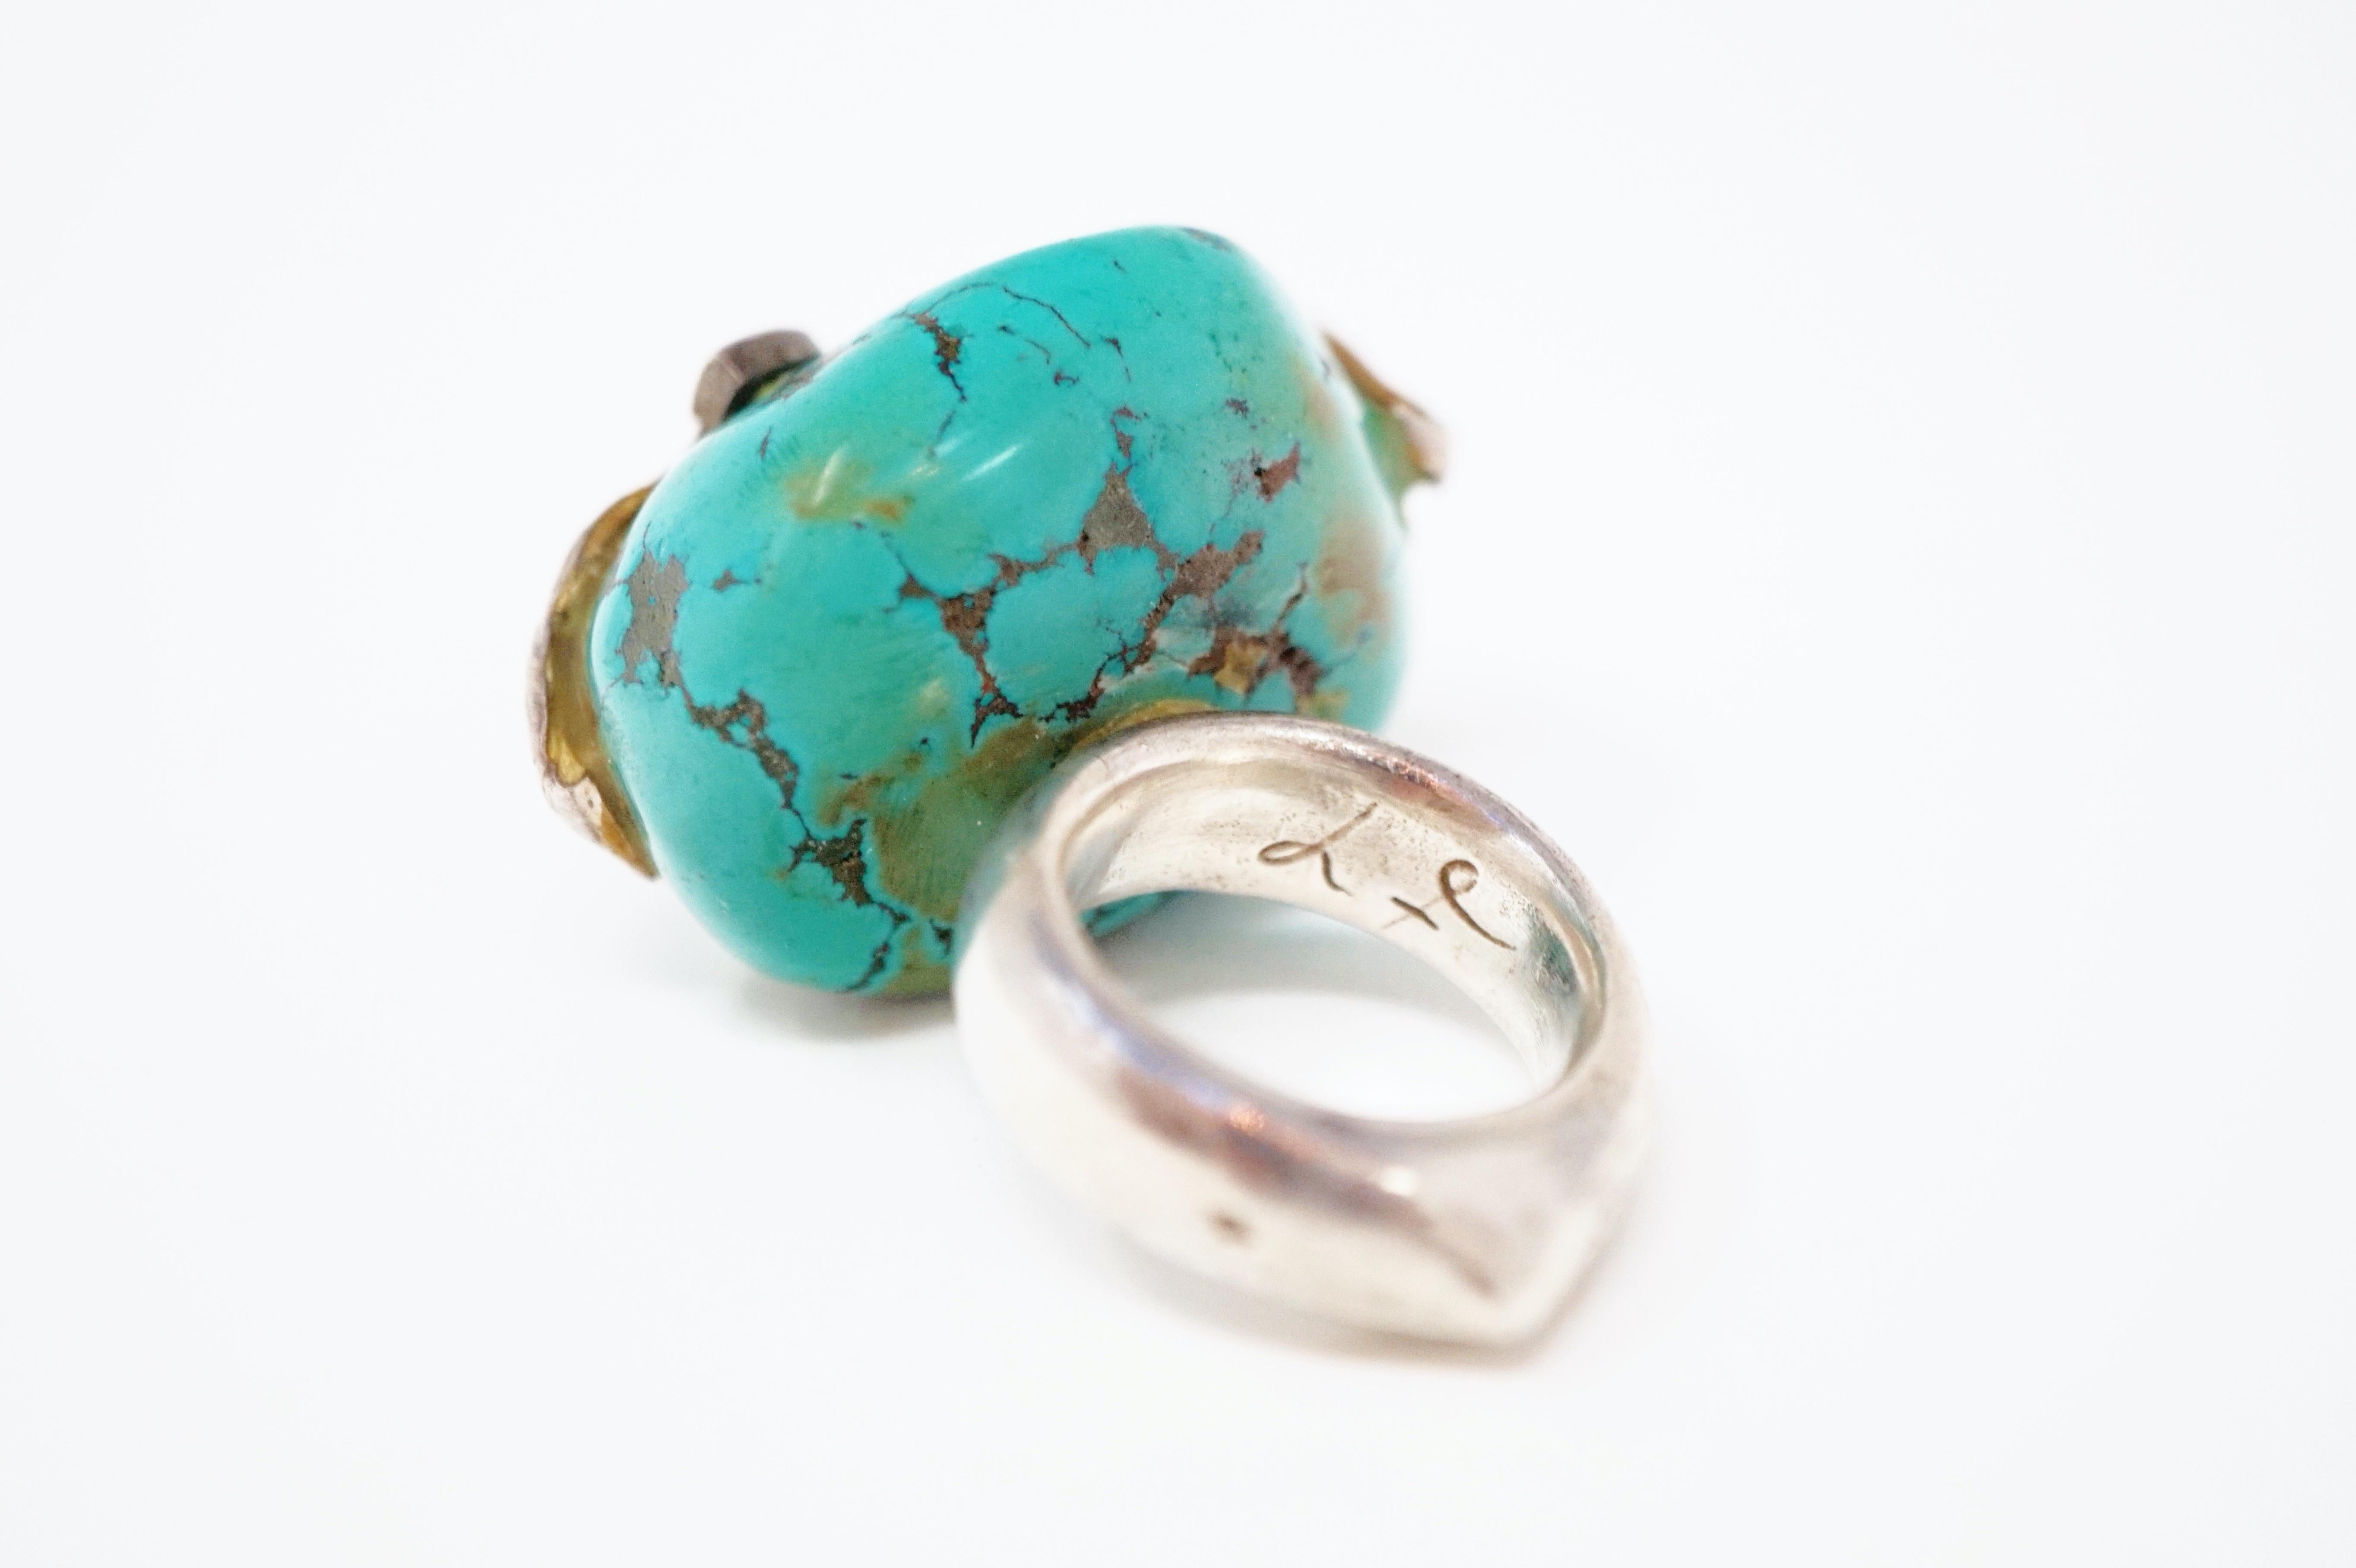 Round Cut Loulou de la Falaise Large Turquoise Cocktail Ring with Gemstone Accents